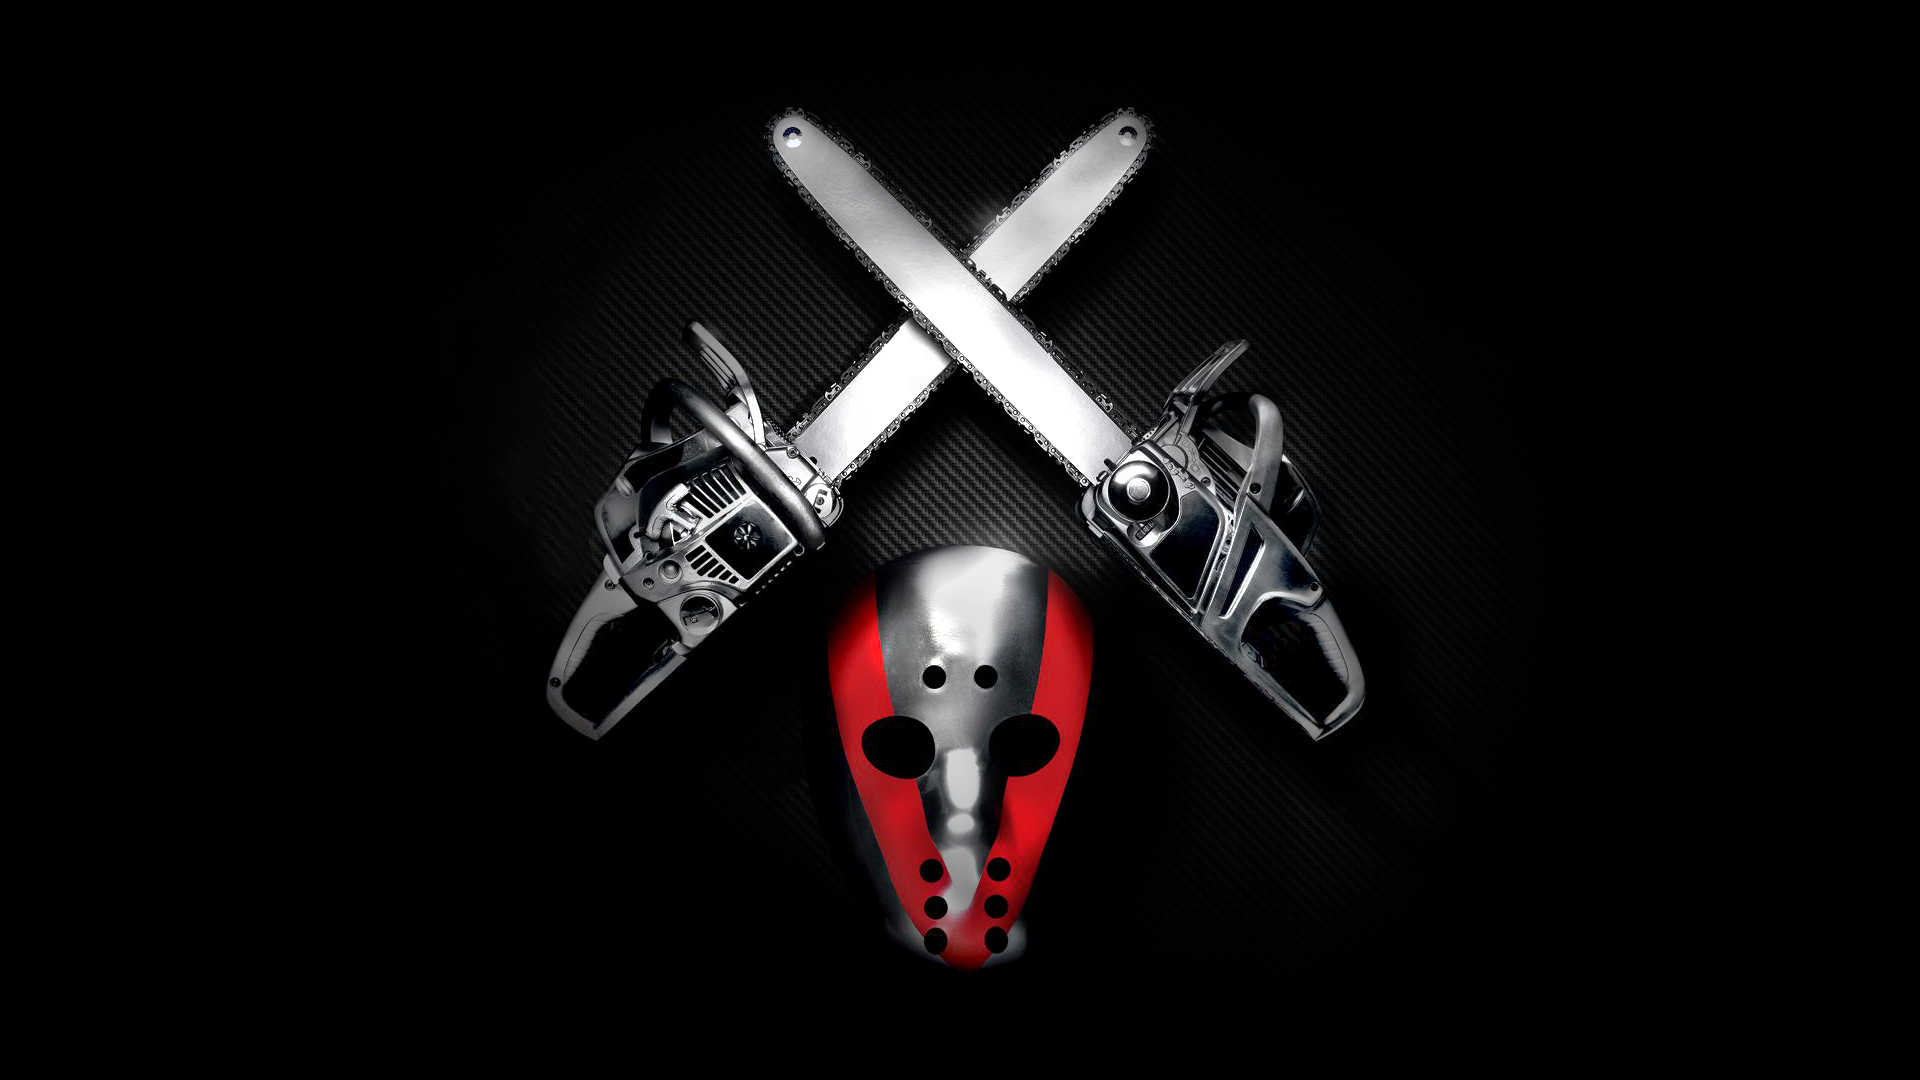 Made A Shady Xv Wallpaper Thought You Guys Might Like It